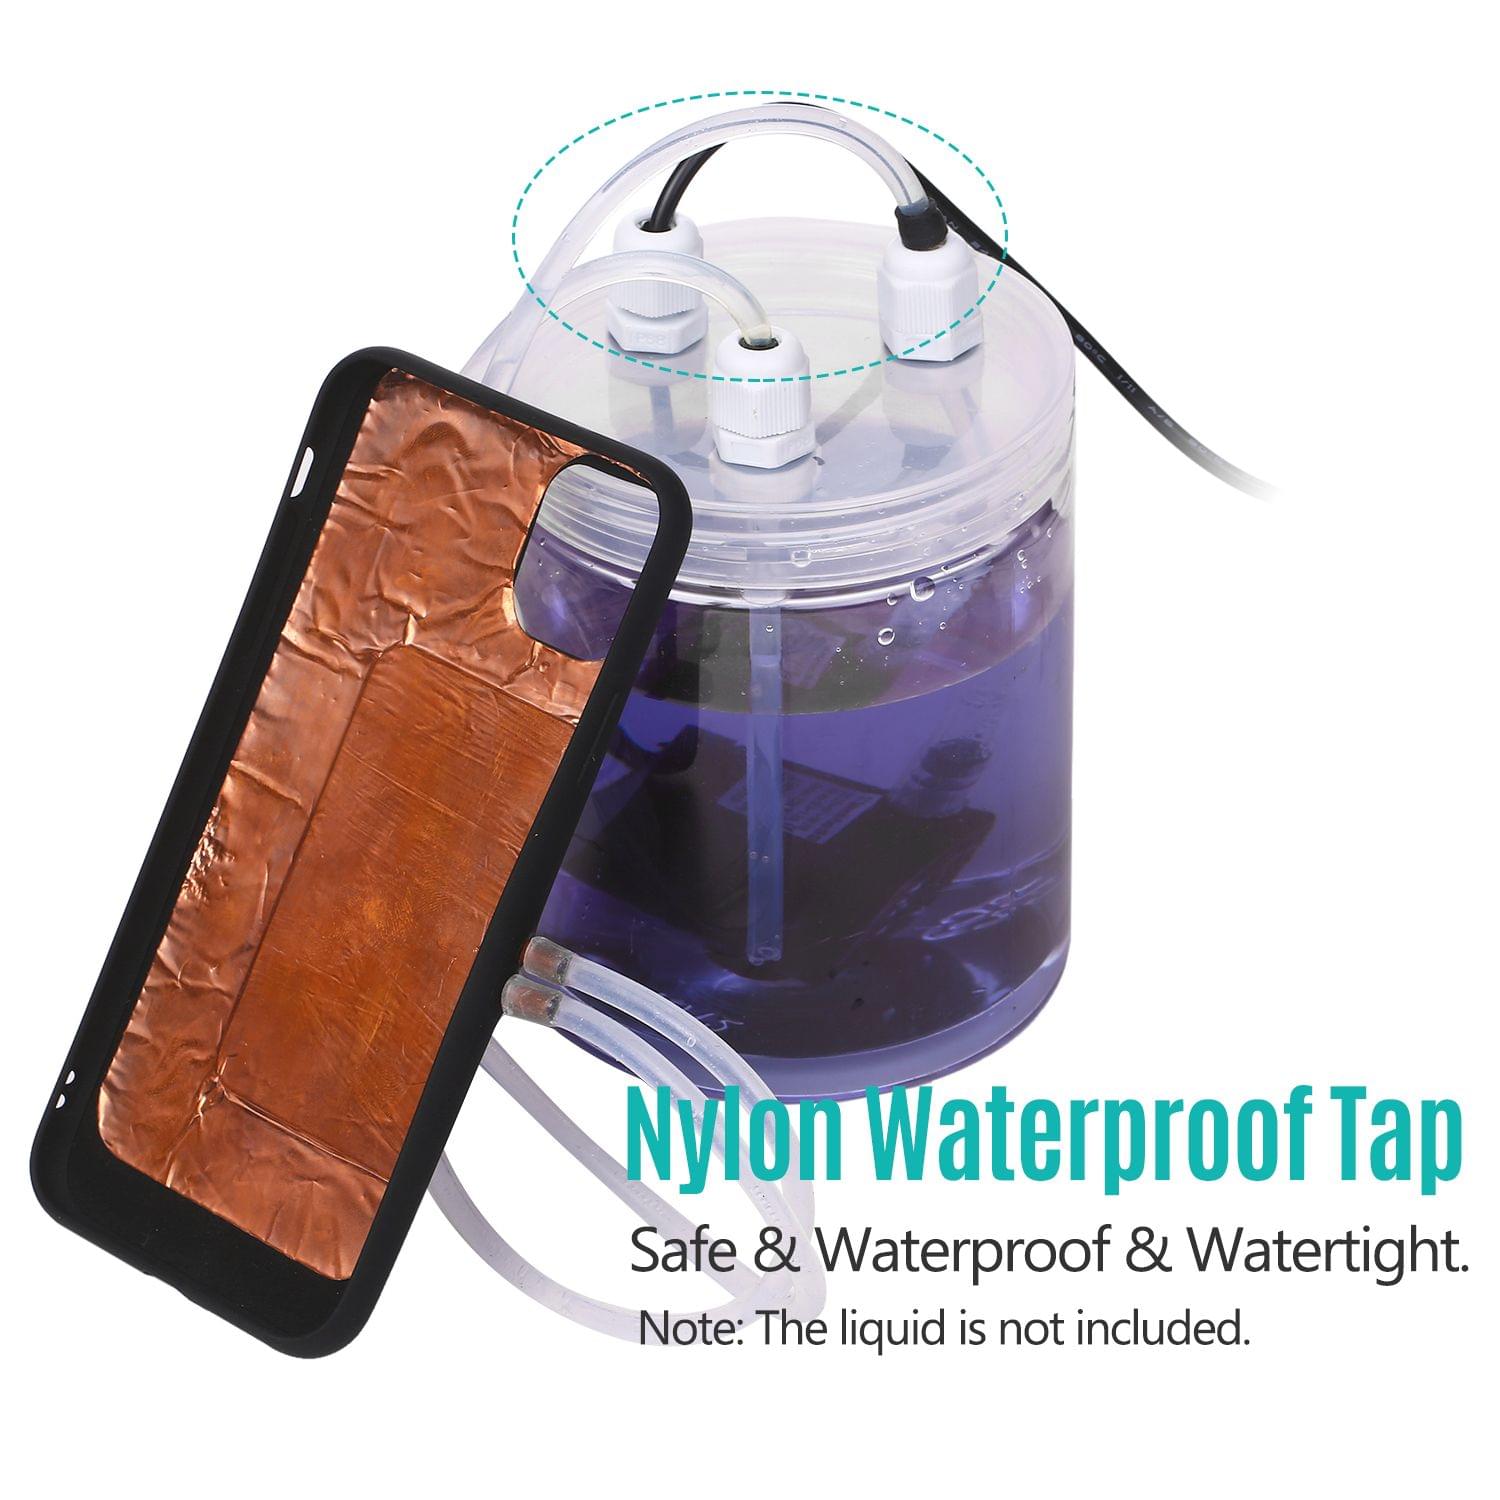 Phone Cooler Mobile Phone Radiator Water-cooled Cooling - Compatible with iPhone 11 5.8inch